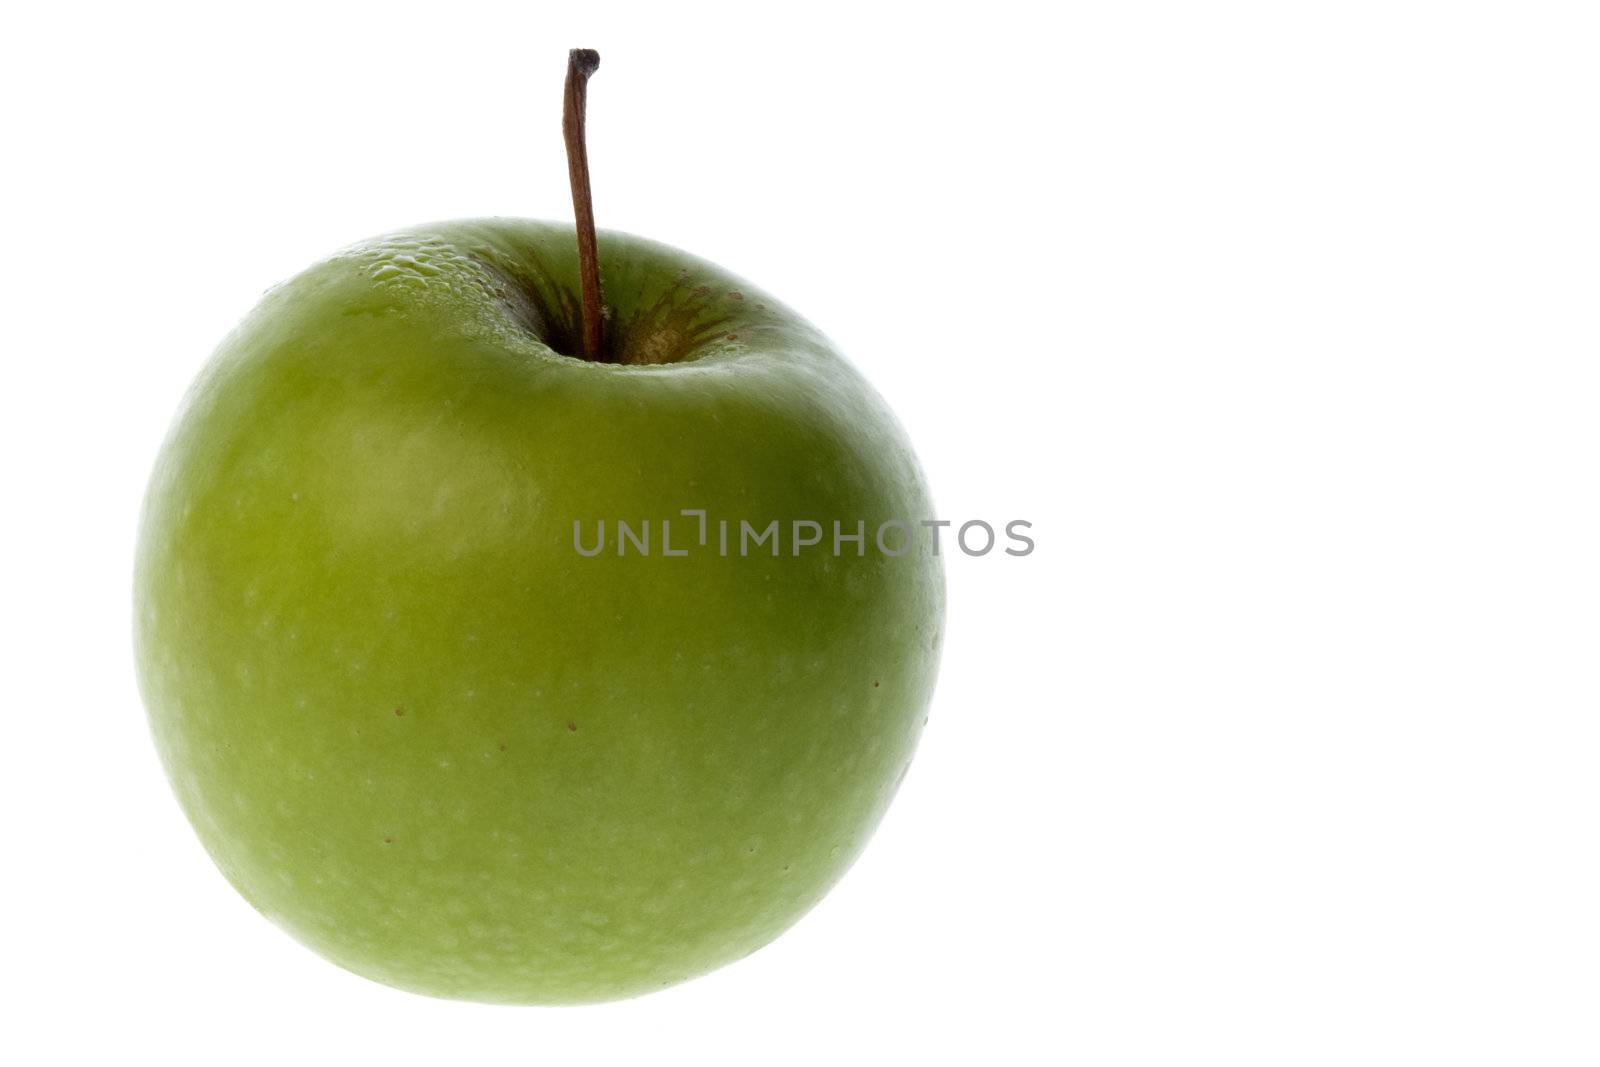 Isolated image of a green apple.